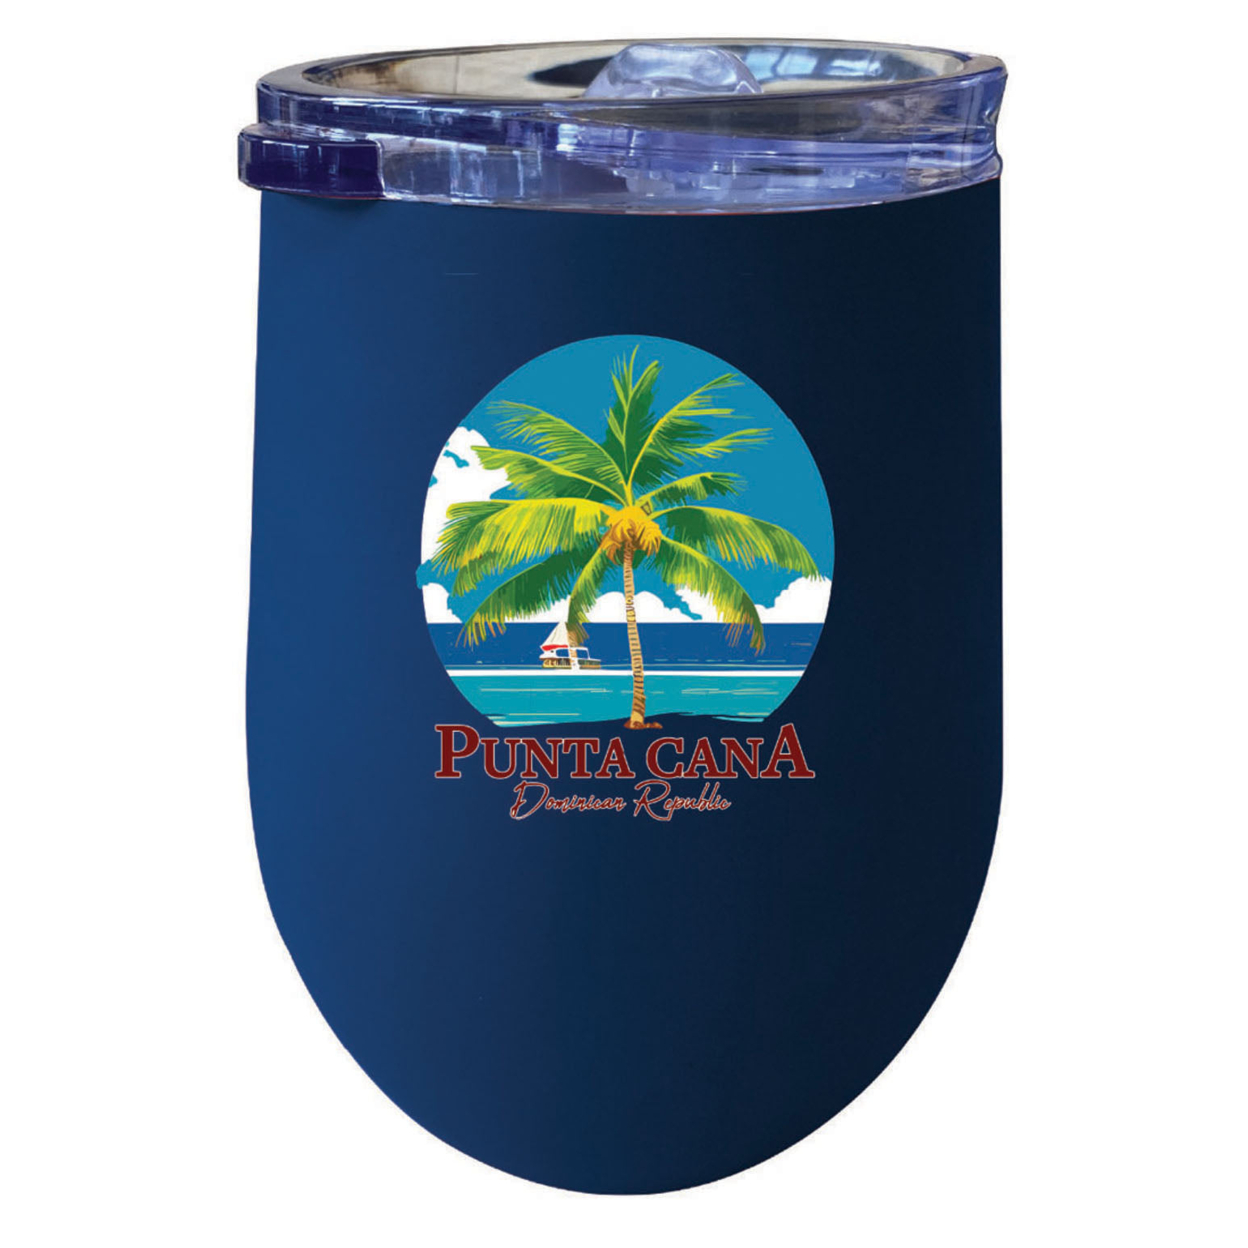 Punta Cana Dominican Republic Souvenir 12 Oz Insulated Wine Stainless Steel Tumbler - Navy, PALM